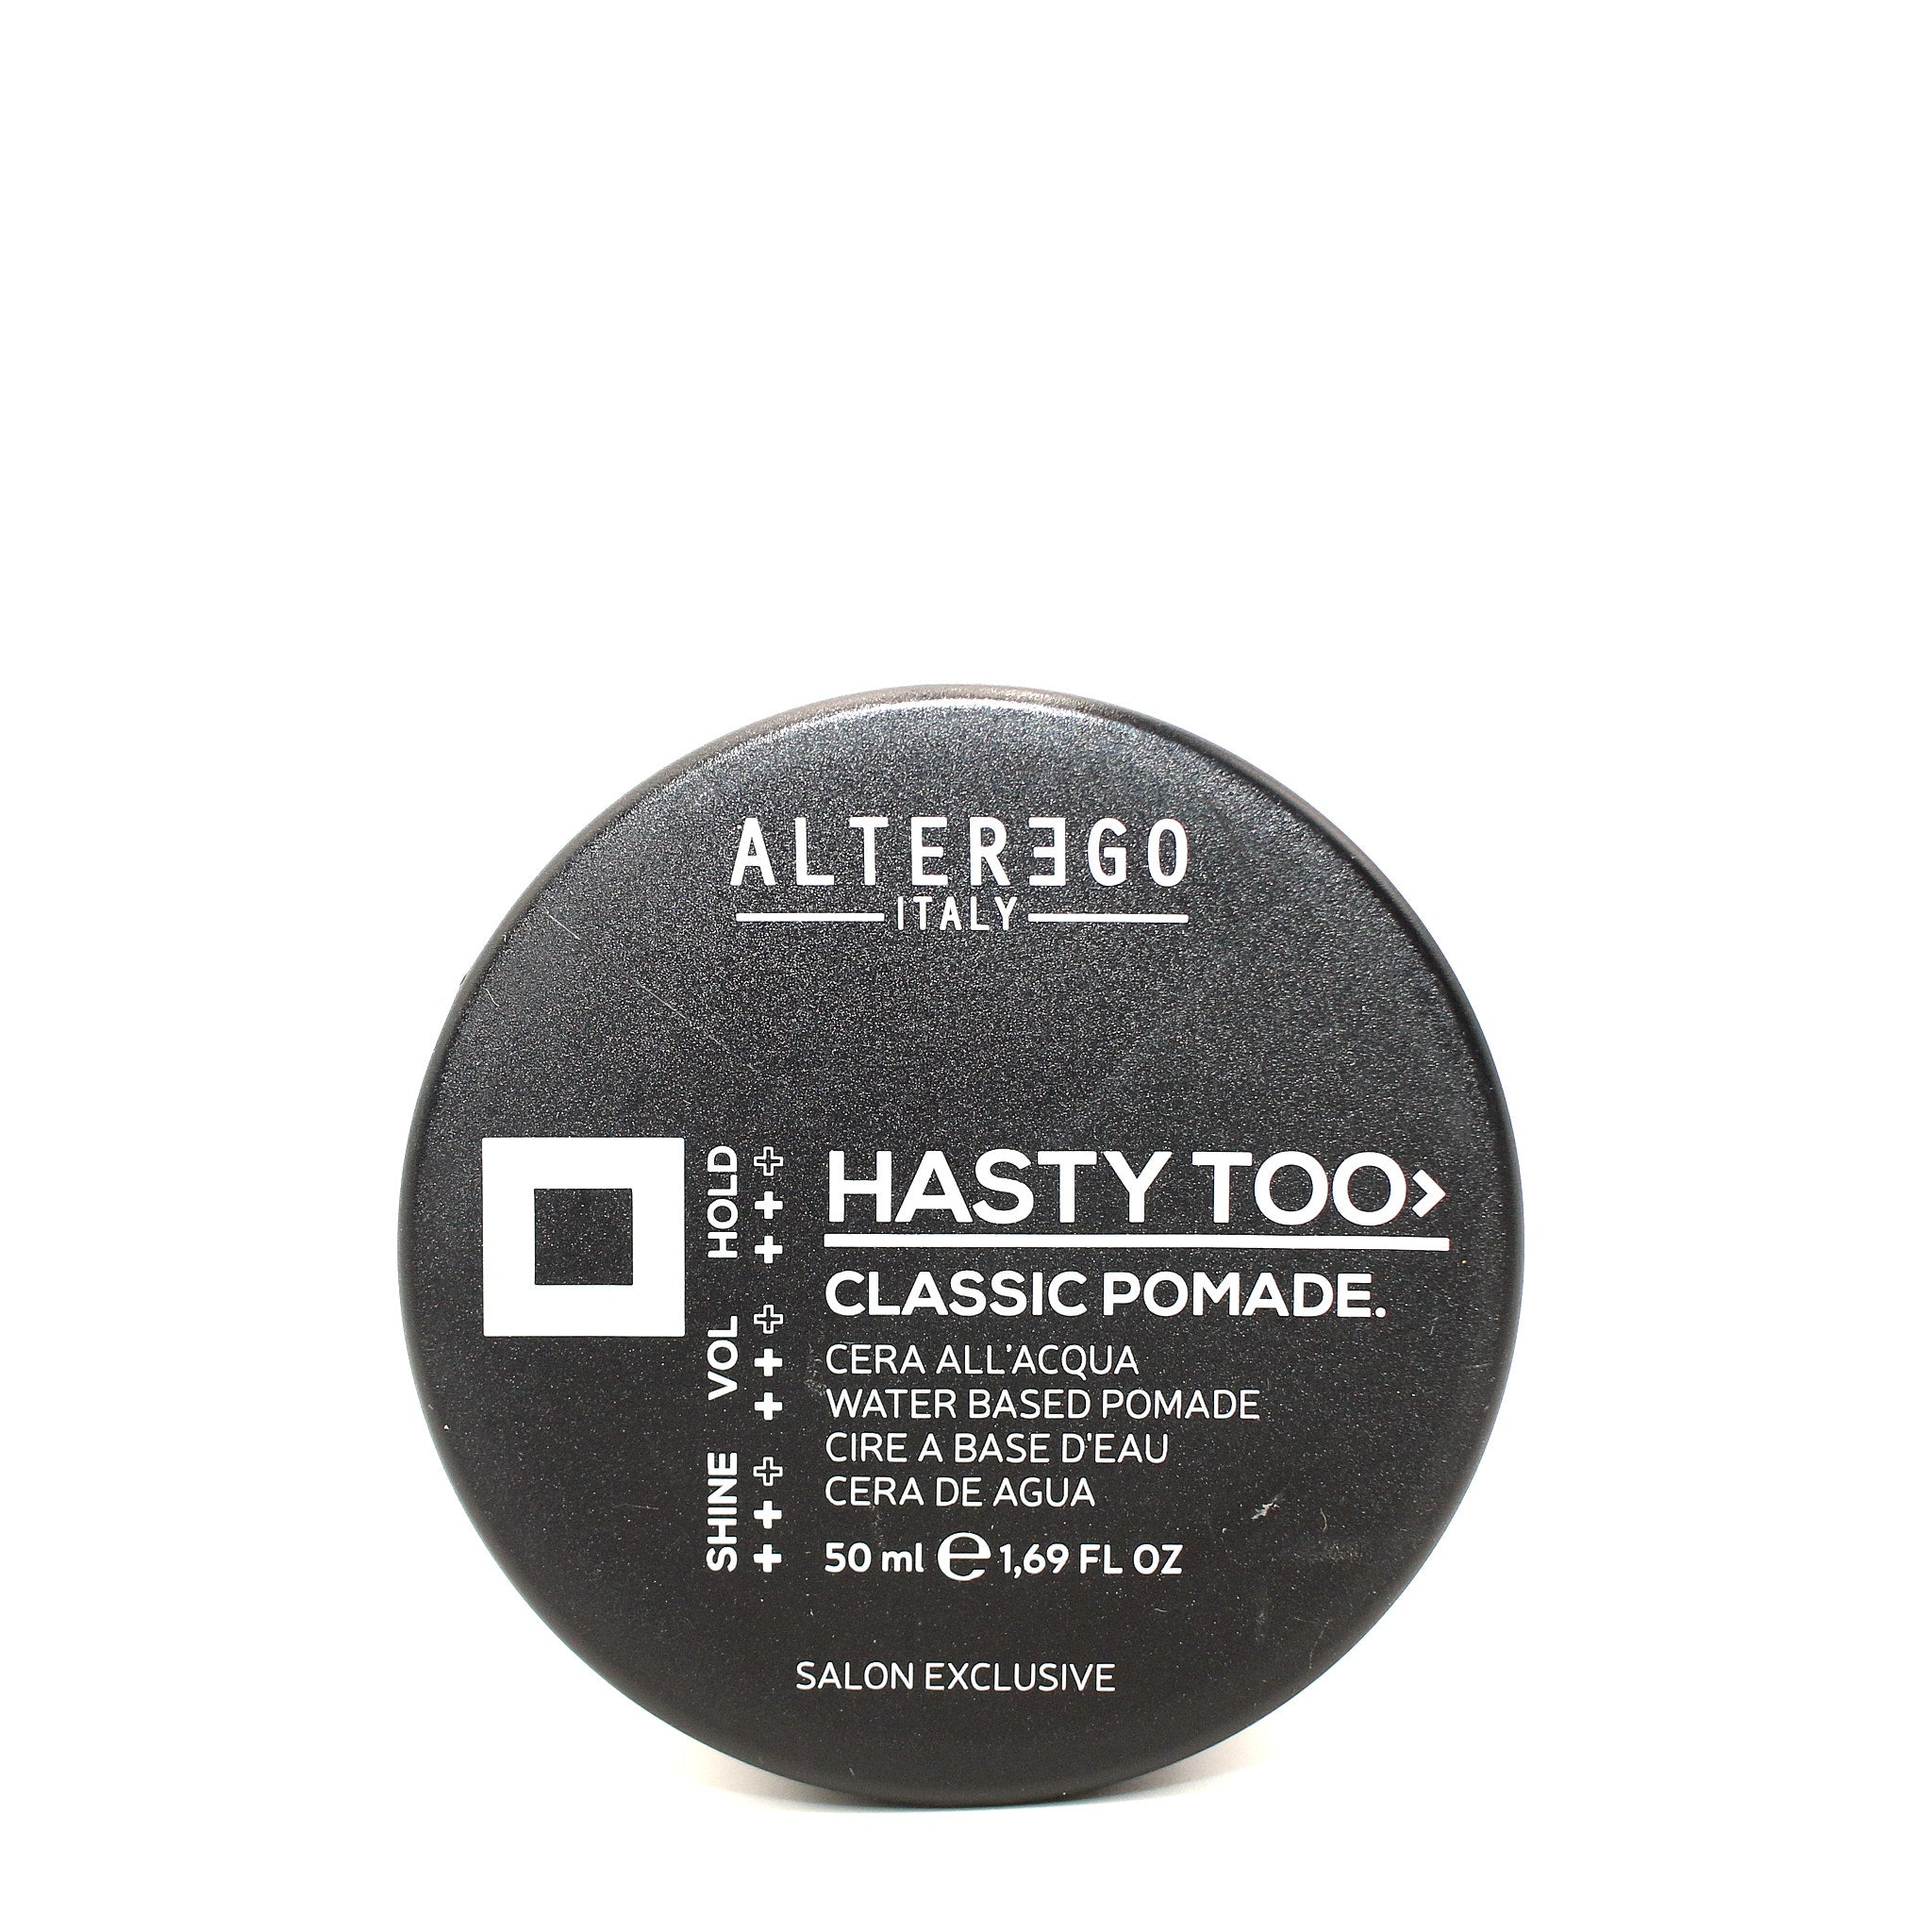 ALTER EGO Hasty Too Classic Pomade 1.69 oz